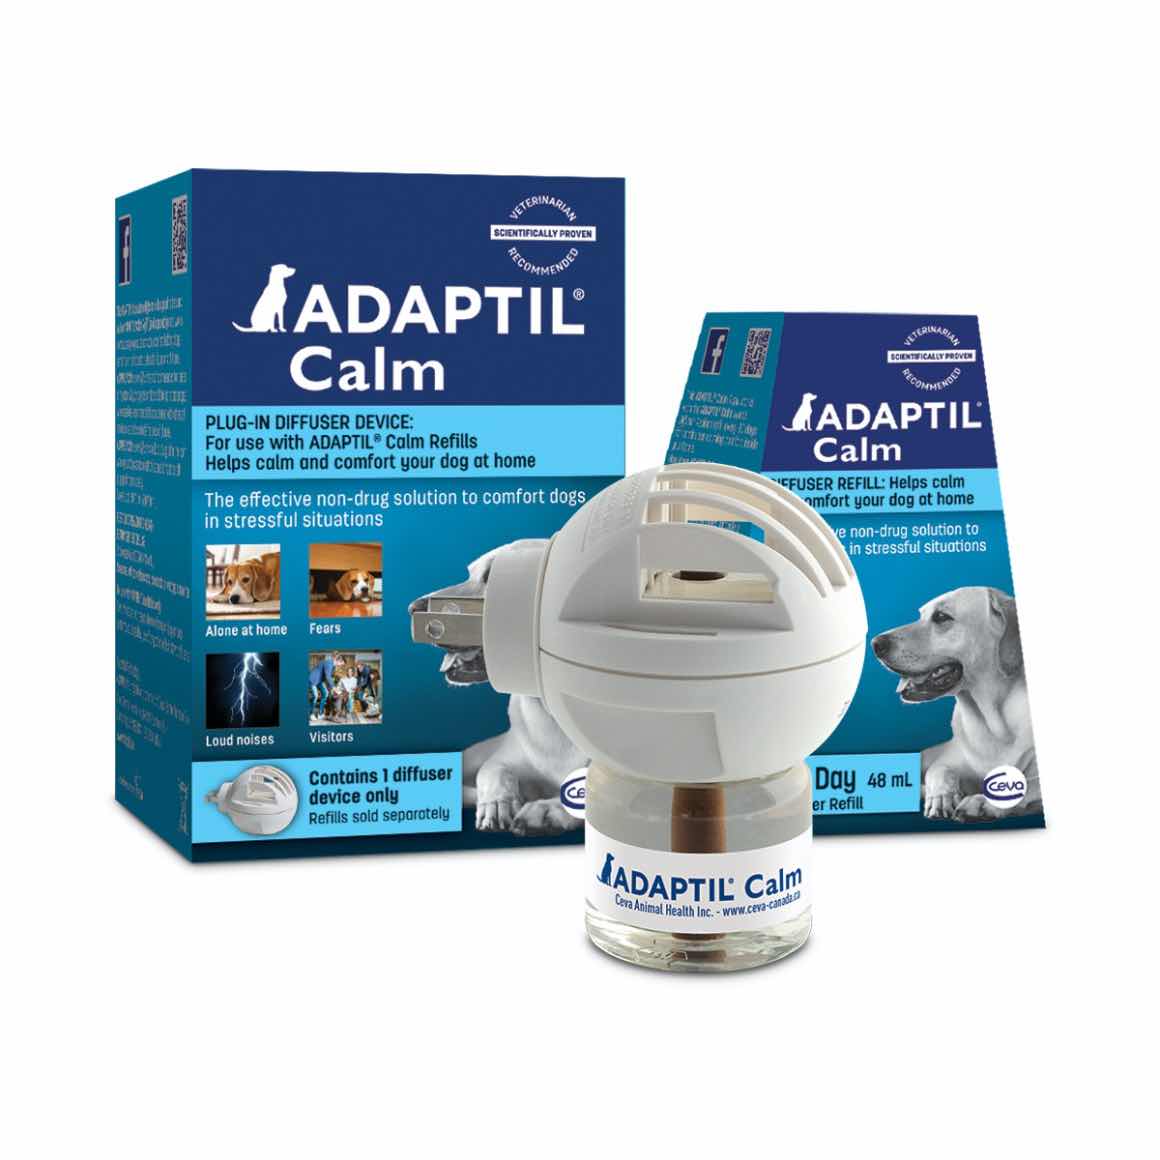 2400284_Dogs_Adaptil Calm Dog Appeasing Pheromone_Electric Diffuser ONLY (refill sold separately)